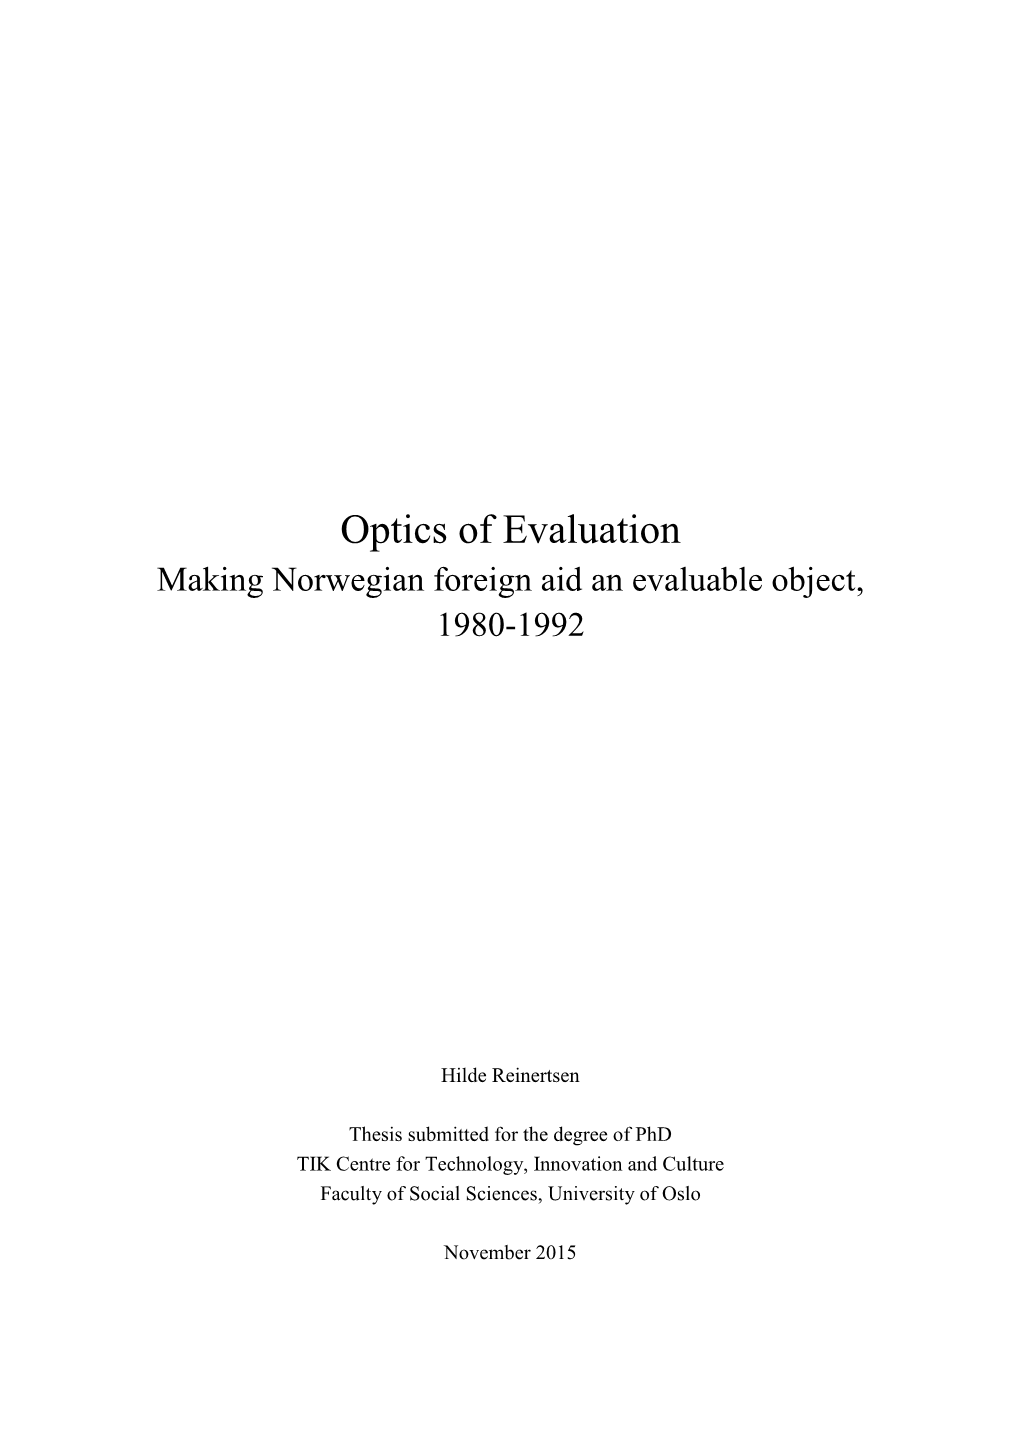 Optics of Evaluation Making Norwegian Foreign Aid an Evaluable Object, 1980-1992